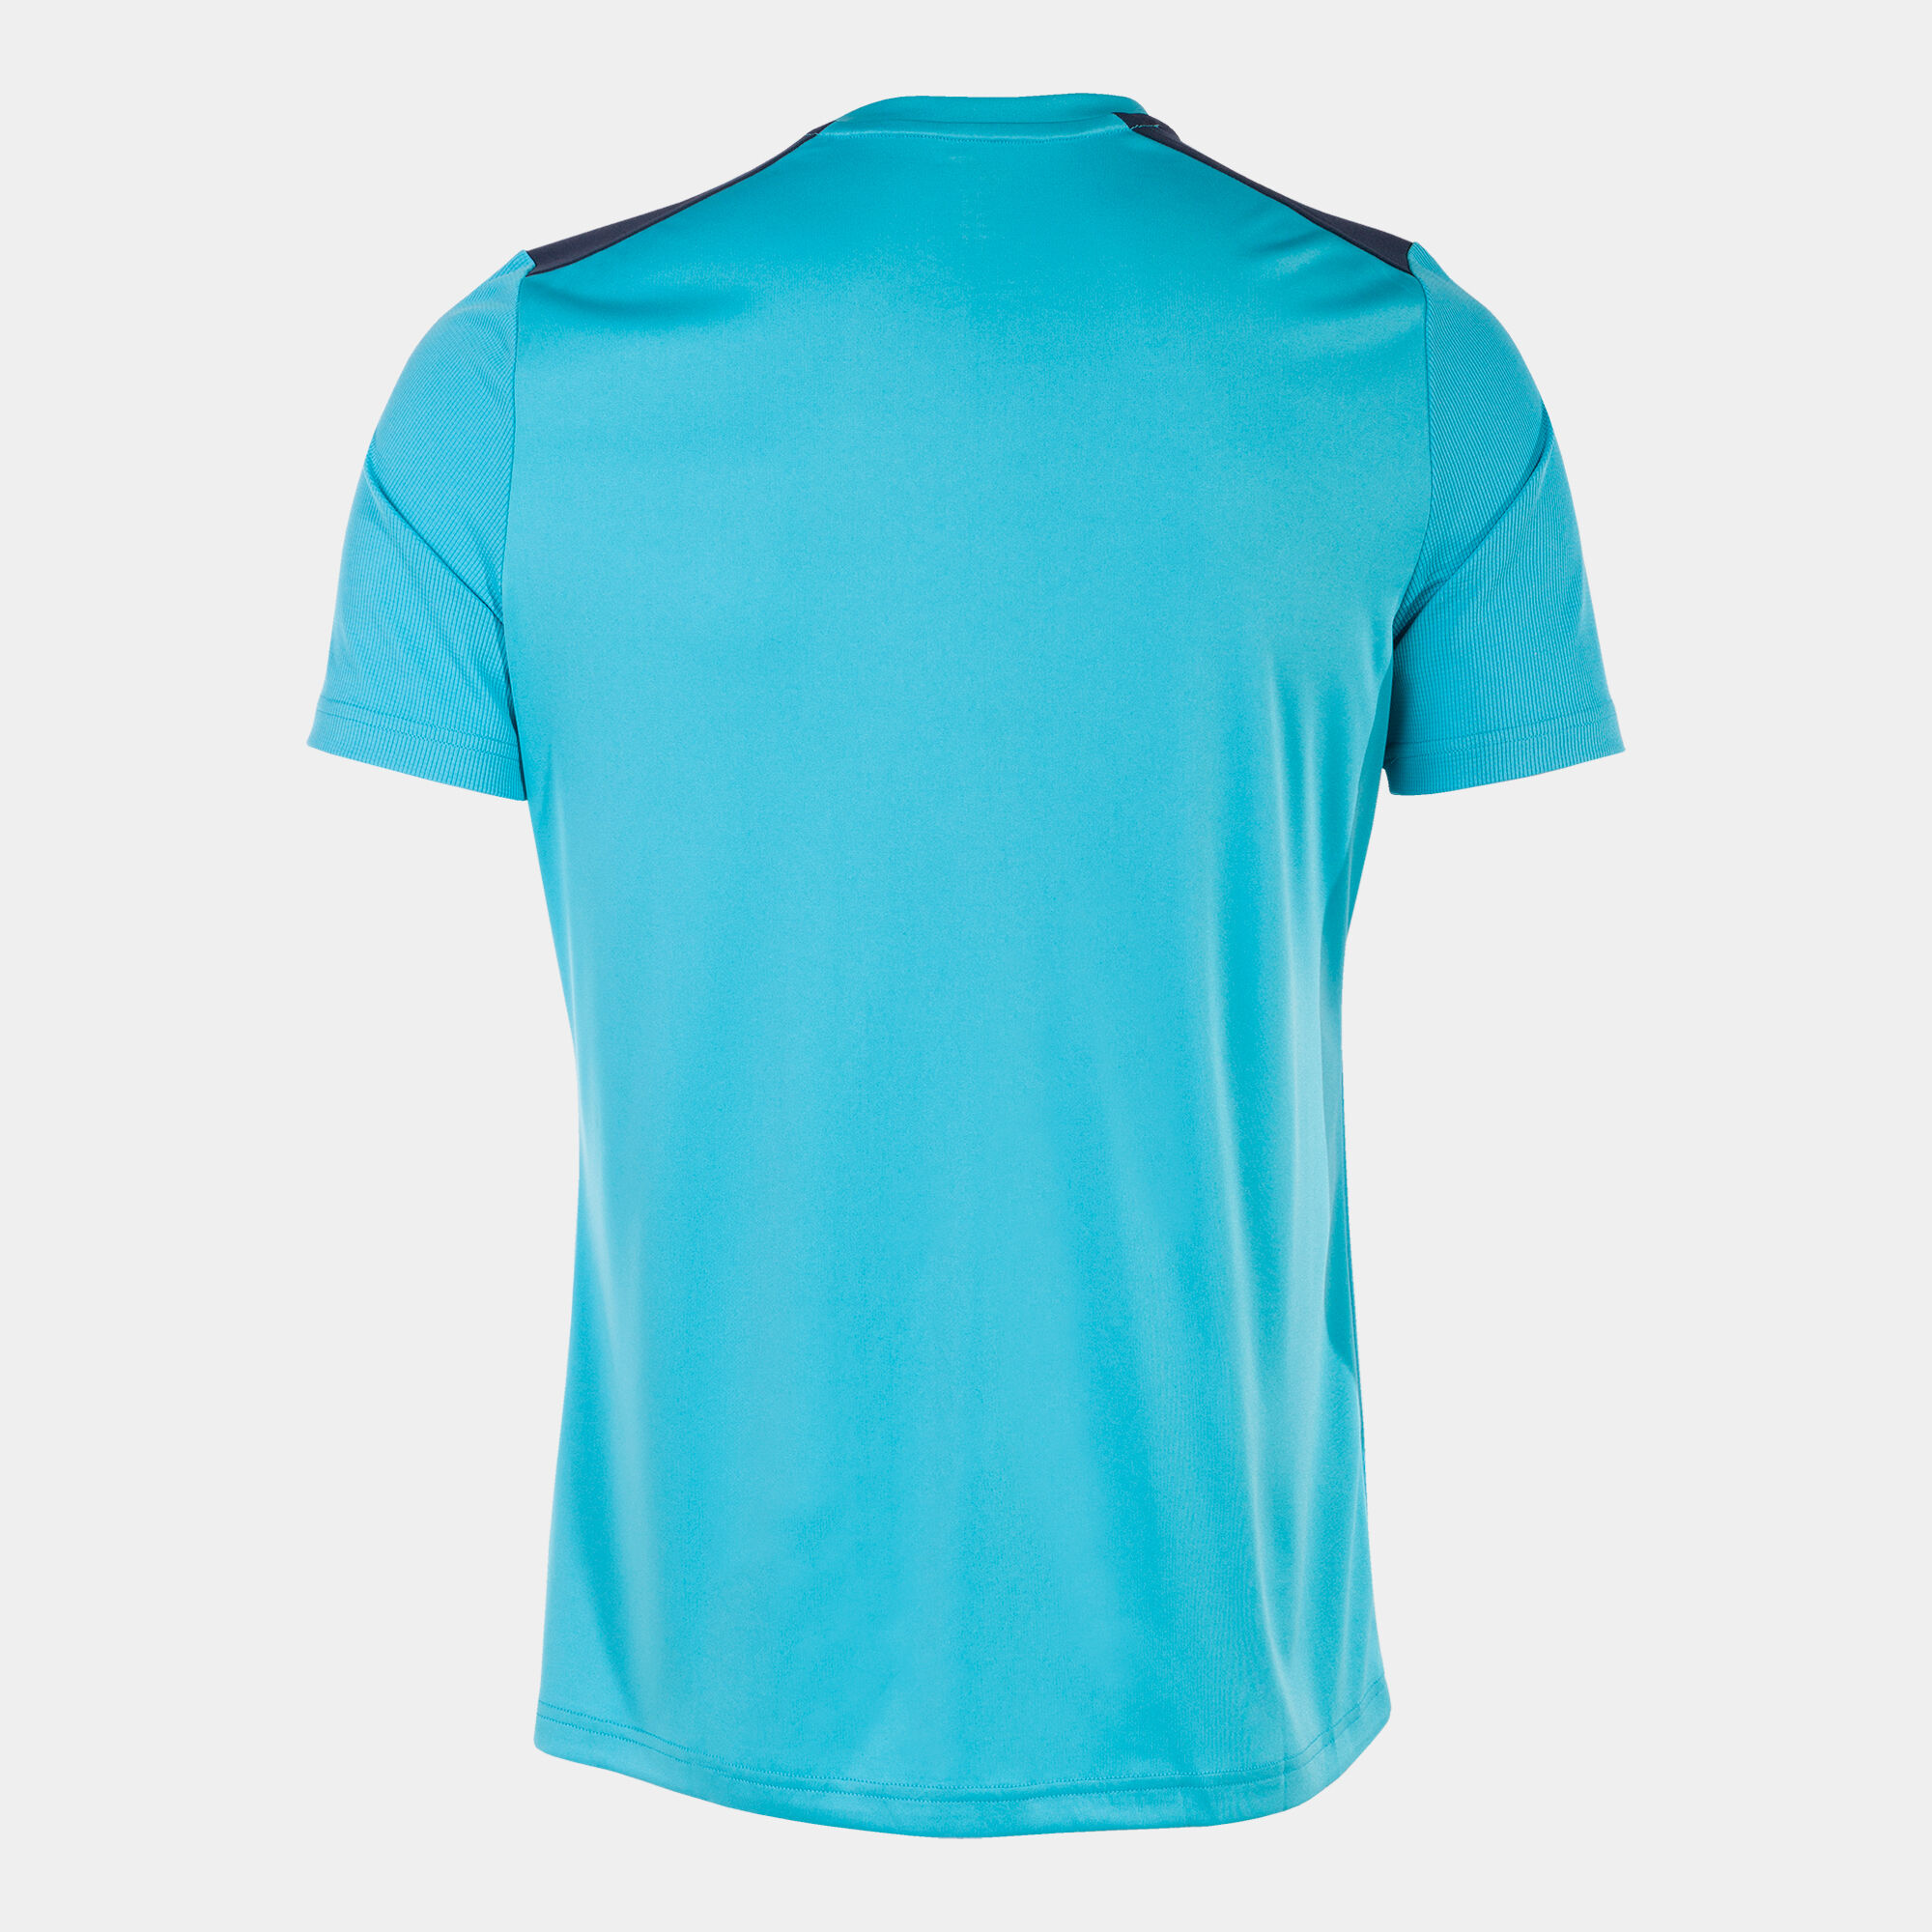 Maillot manches courtes homme Championship VII turquoise fluo bleu marine